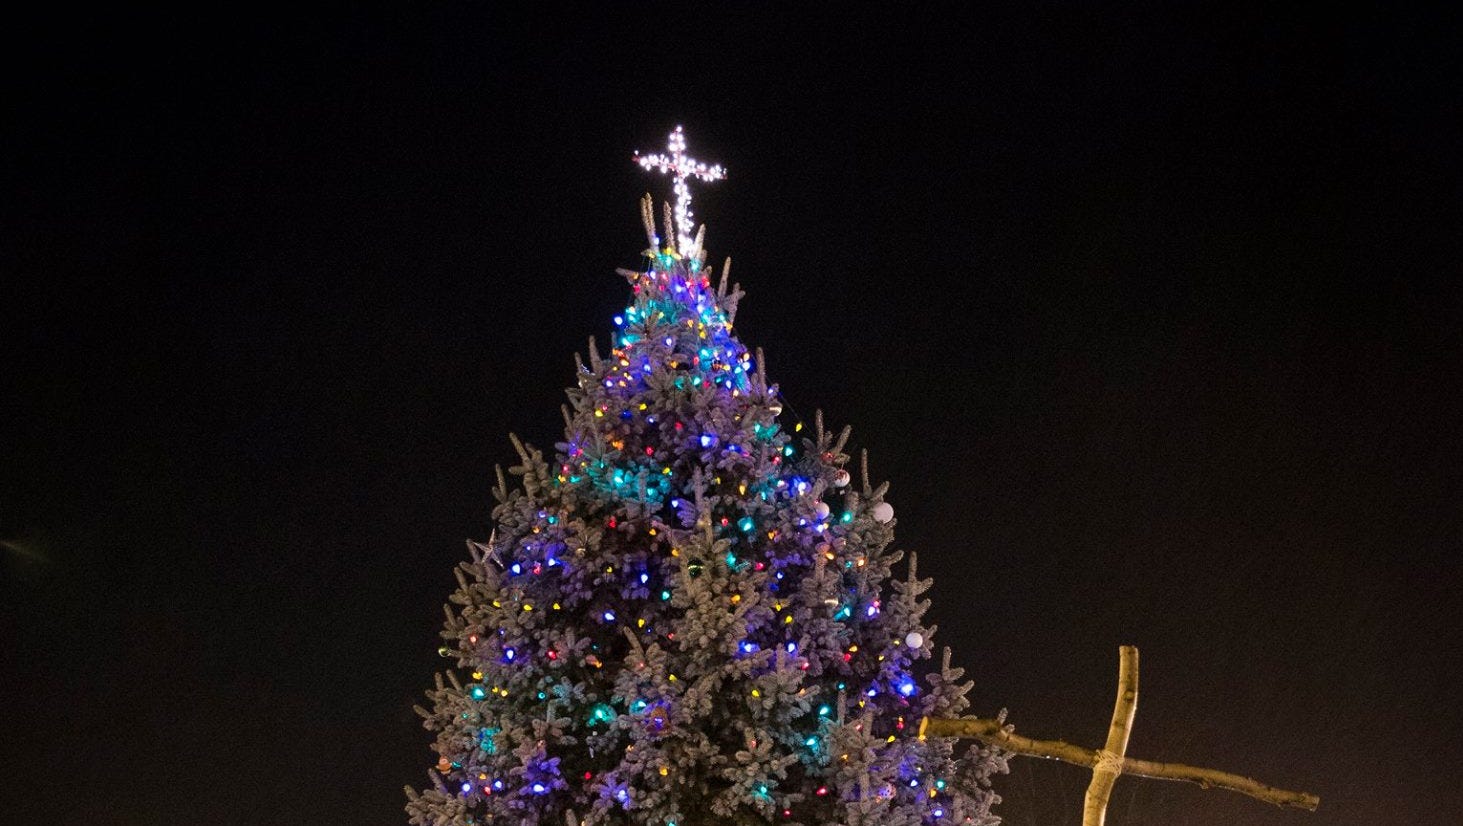 Knightstown removes cross from town Christmas tree